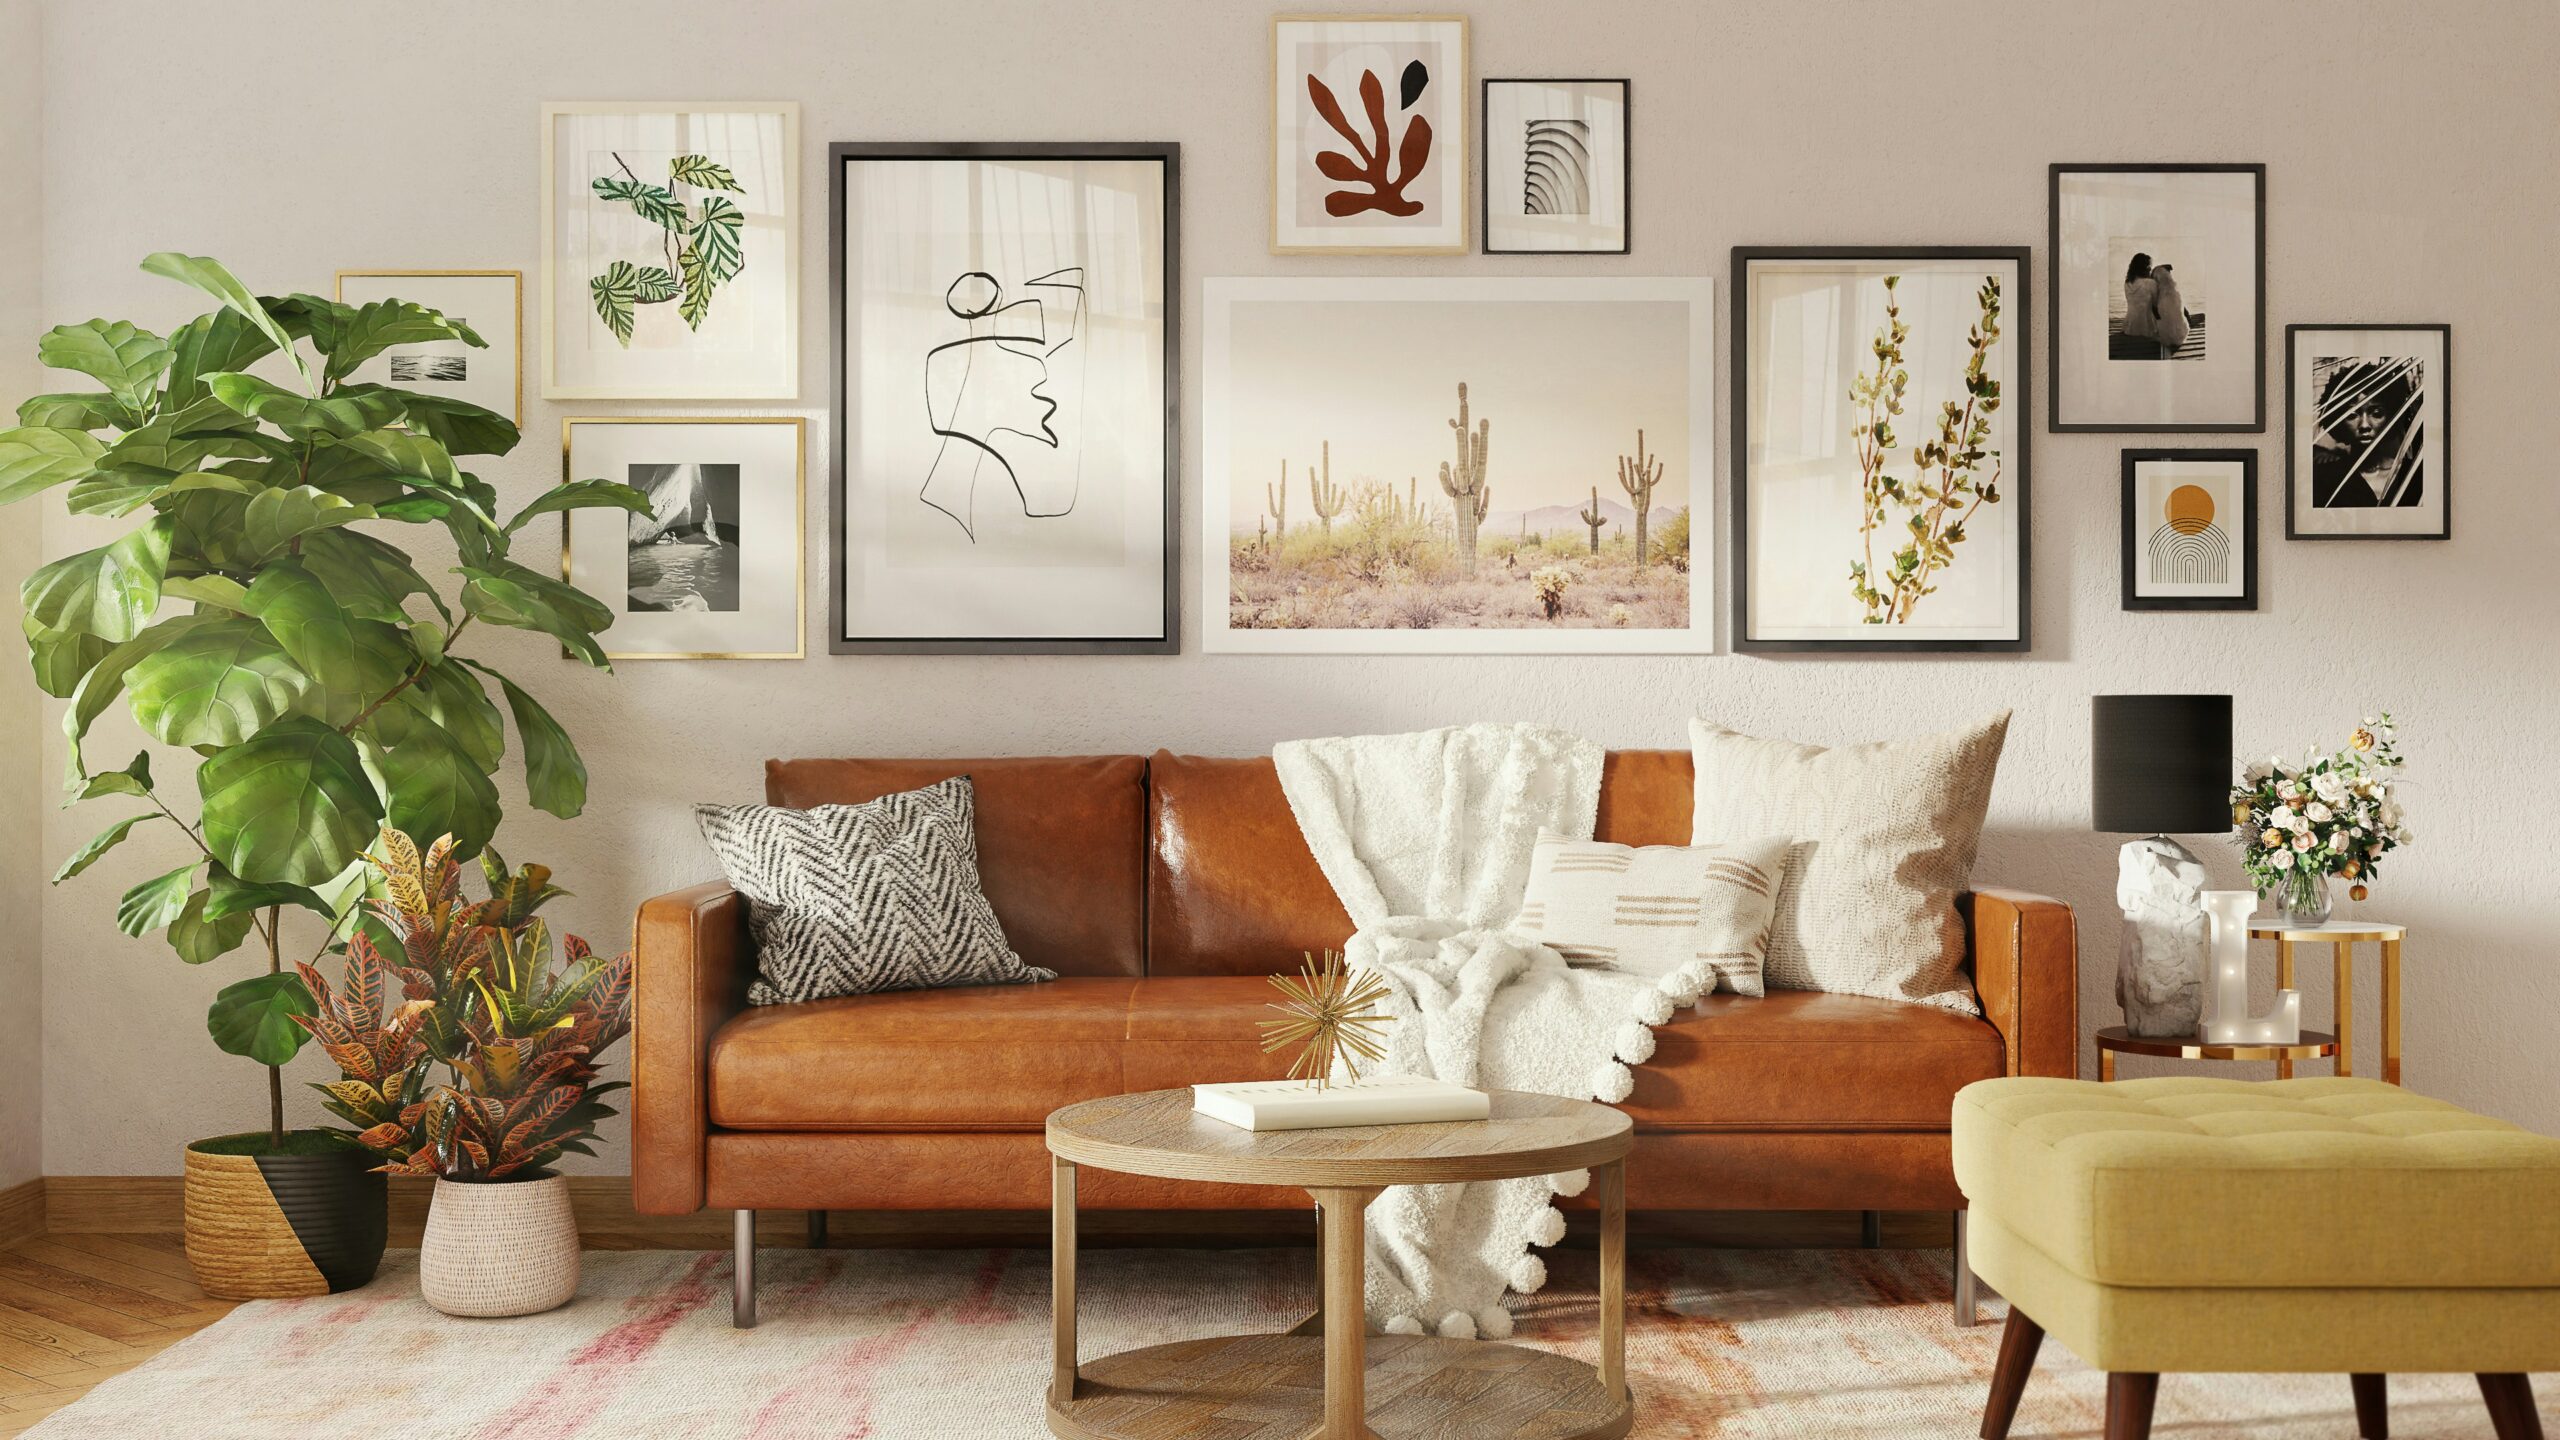 To incorporate a personal touch while creating a Scandinavian interior design style, add artistic elements to the space